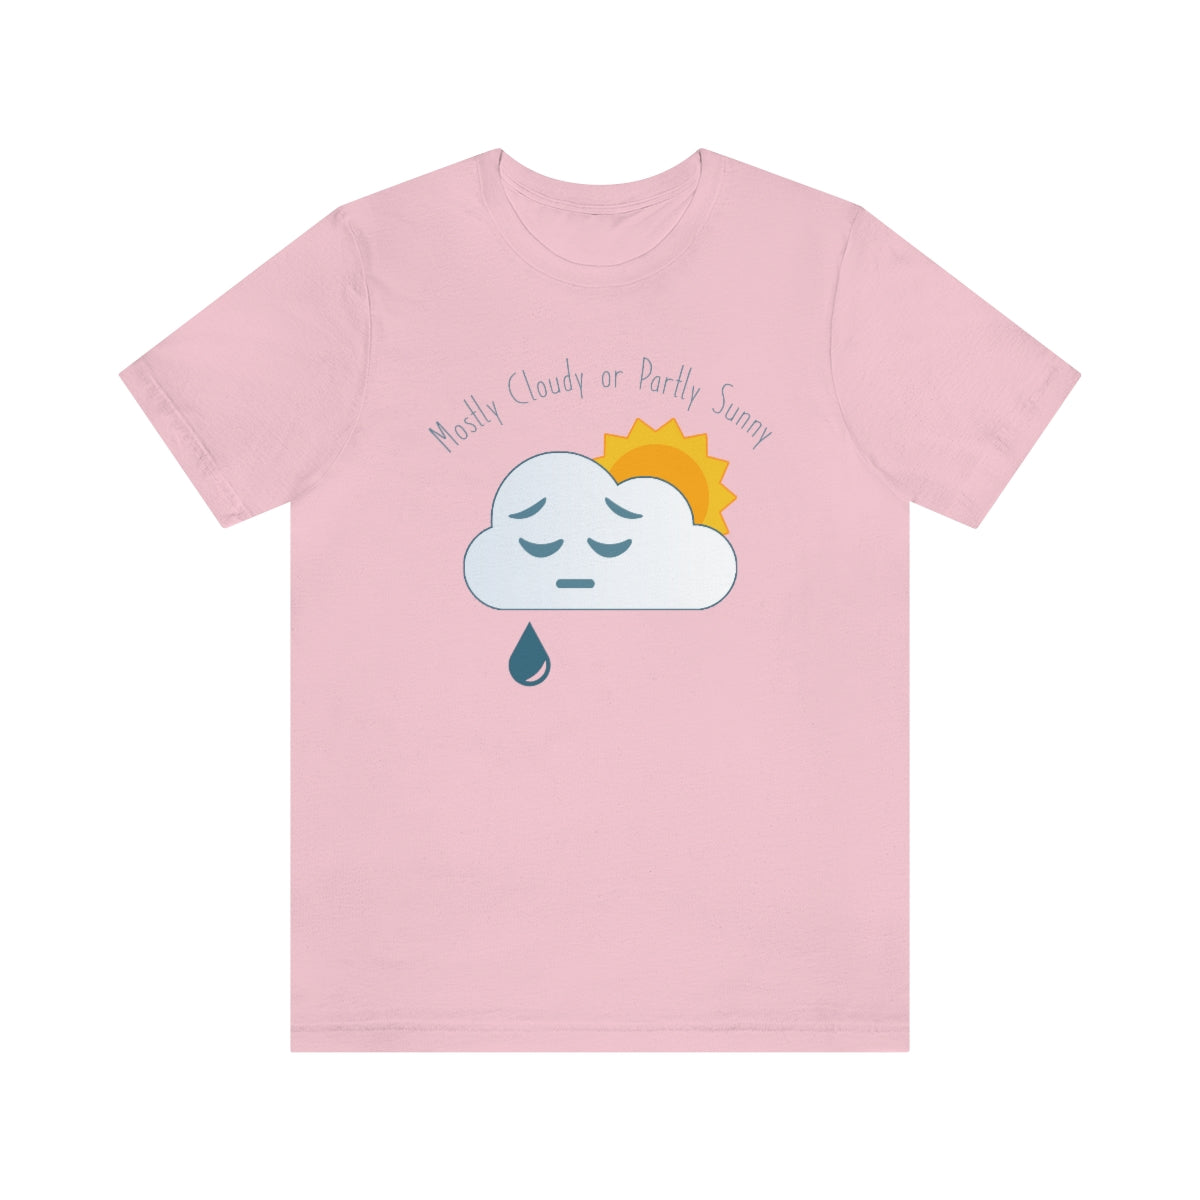 Mostly Cloudy Tee 